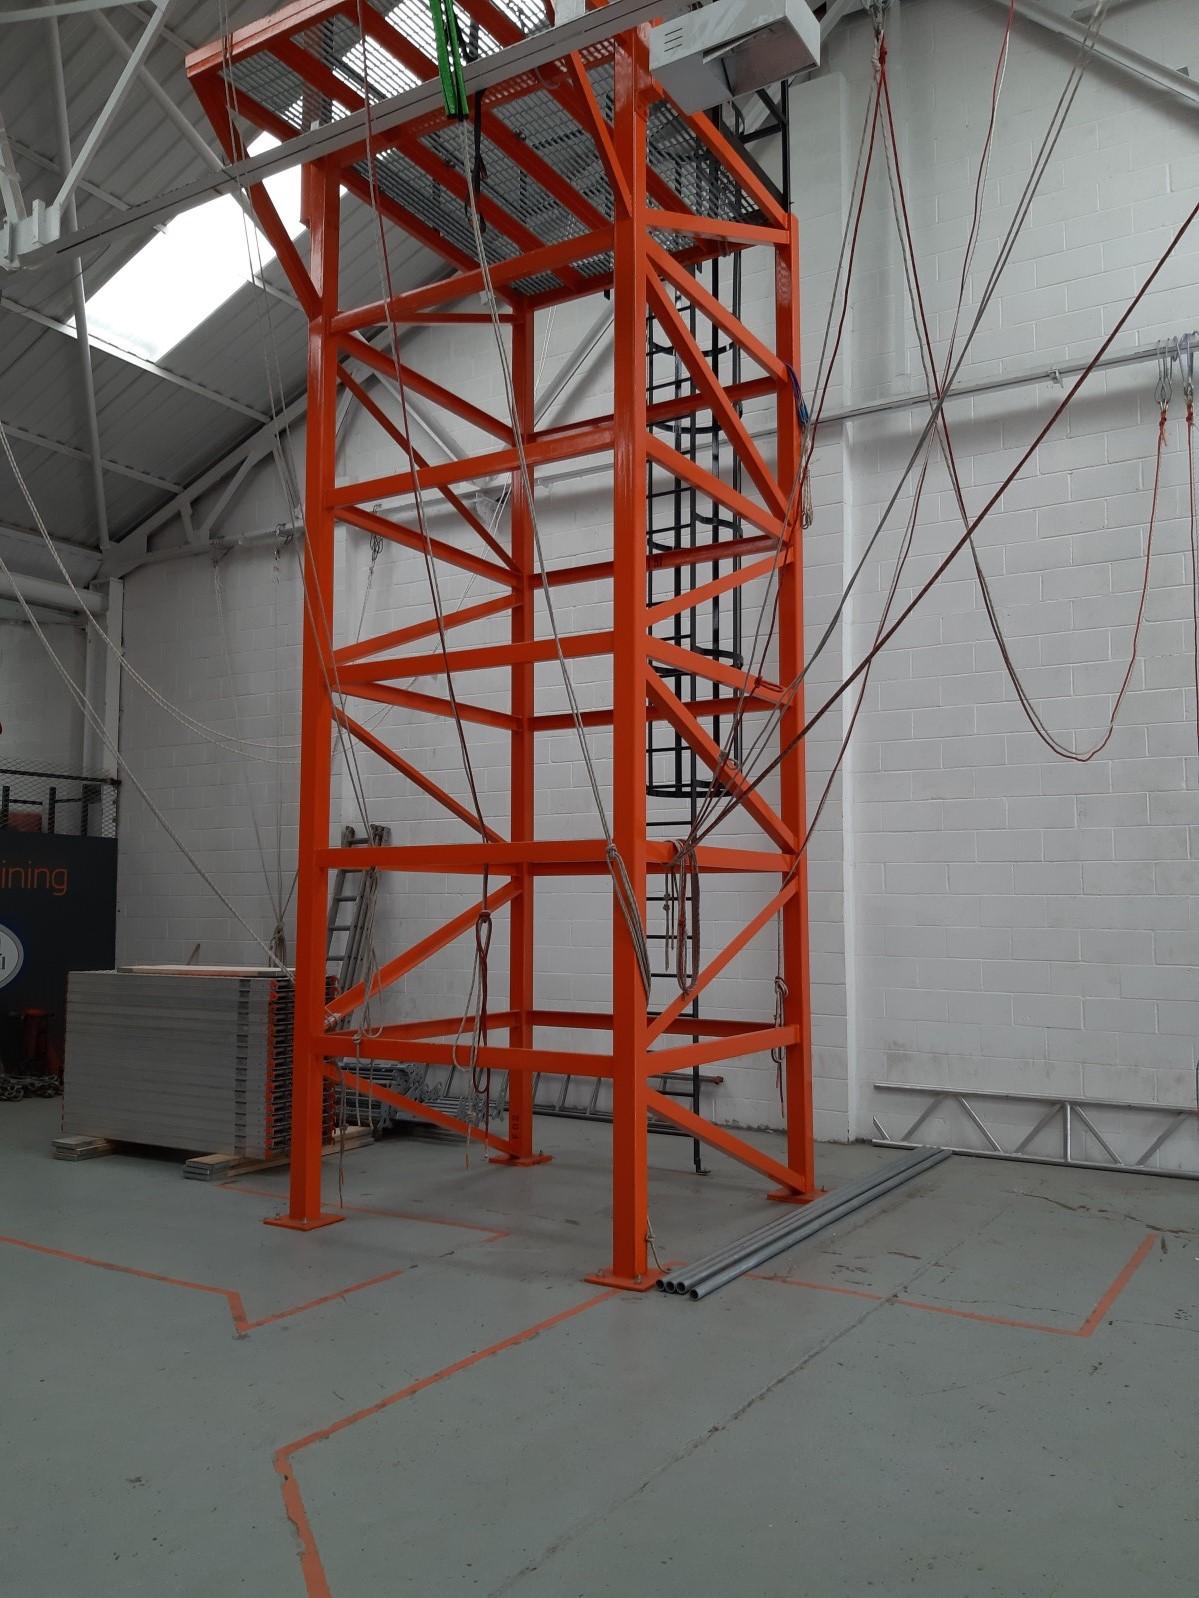 Steel scaffold tower inside a building which was used for rope access training  was valued and then sold as part of an insolvency case. 